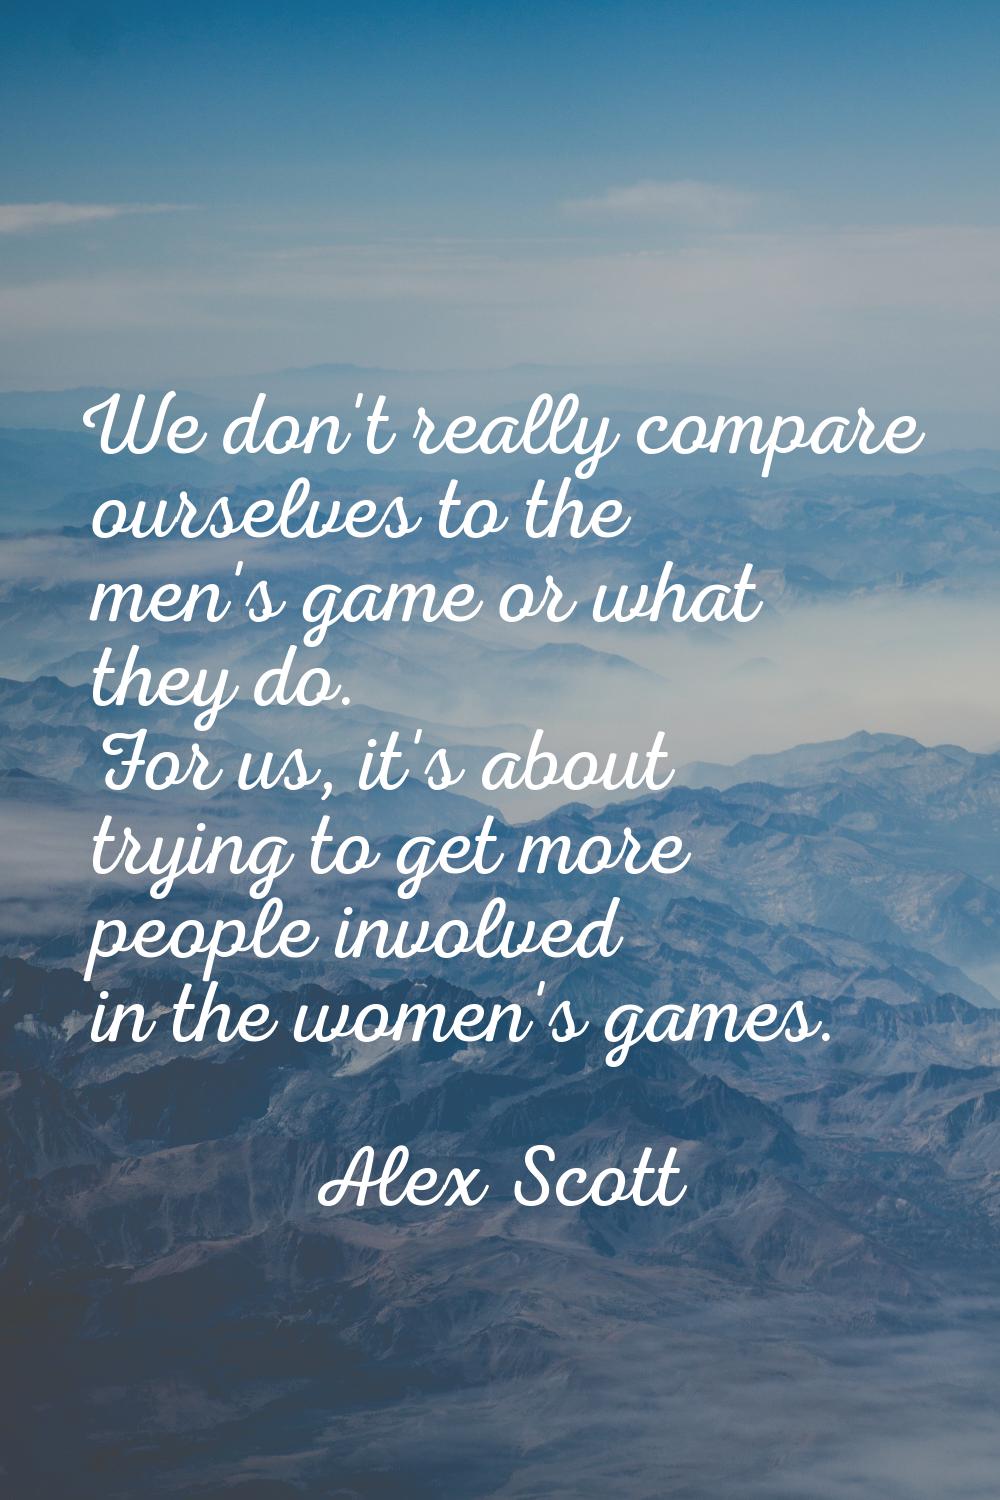 We don't really compare ourselves to the men's game or what they do. For us, it's about trying to g